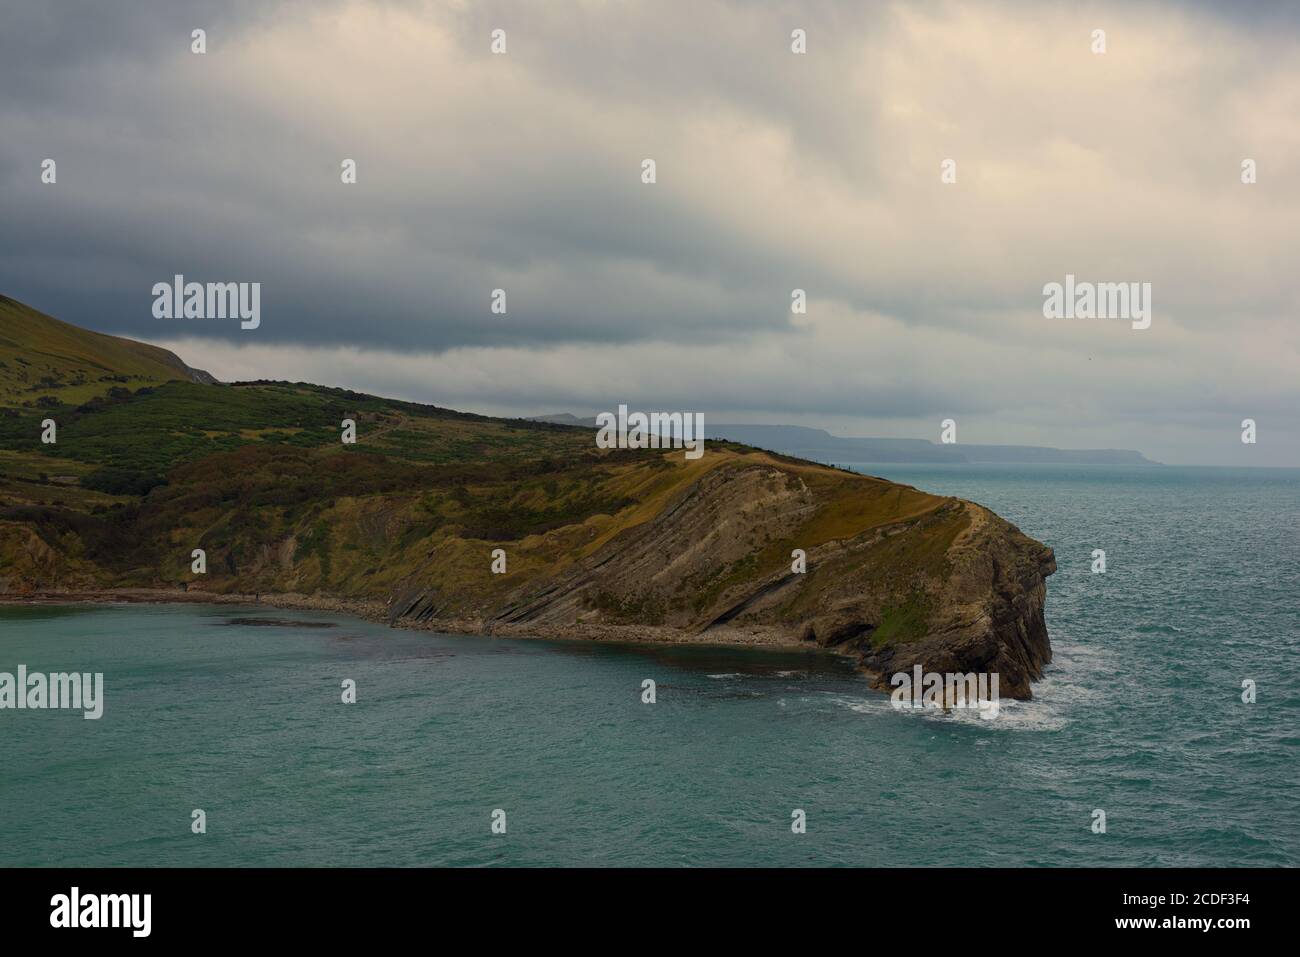 Durdle door and lulworth cove landscape shots Stock Photo